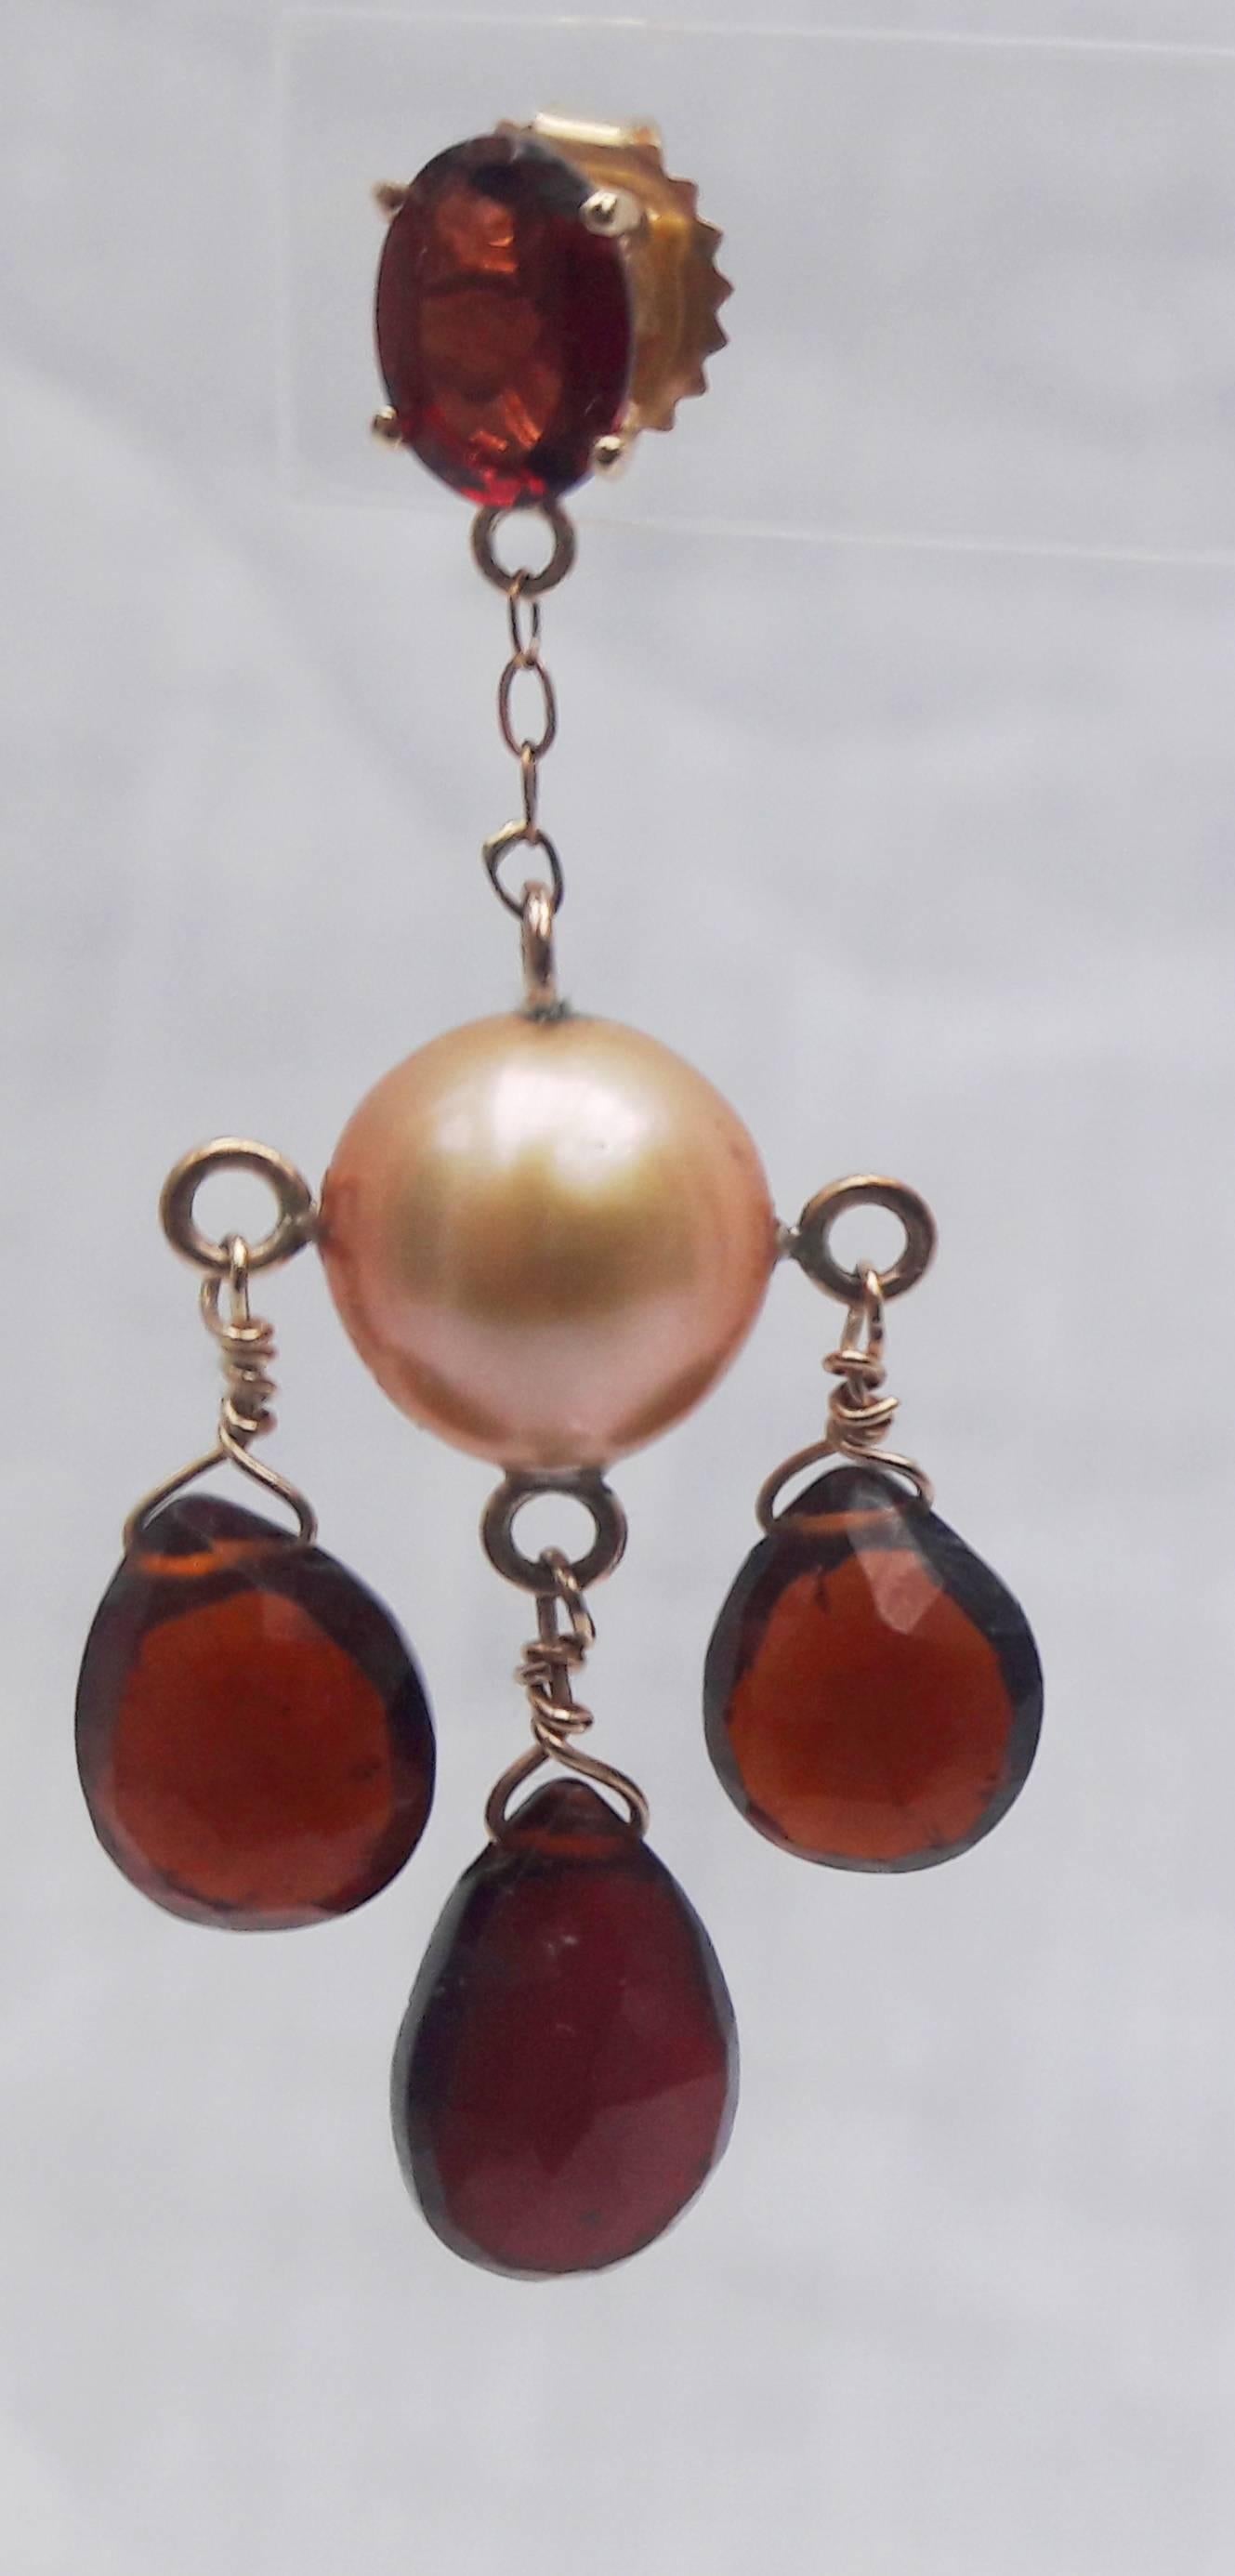 These beautiful earrings are centered around cream pearls with dangling red garnet drops, connected together with a 14k yellow gold chain and stud. The glowing cream cultured Chinese pearl is 8mm. The unique cream coloring highlights the brilliant,